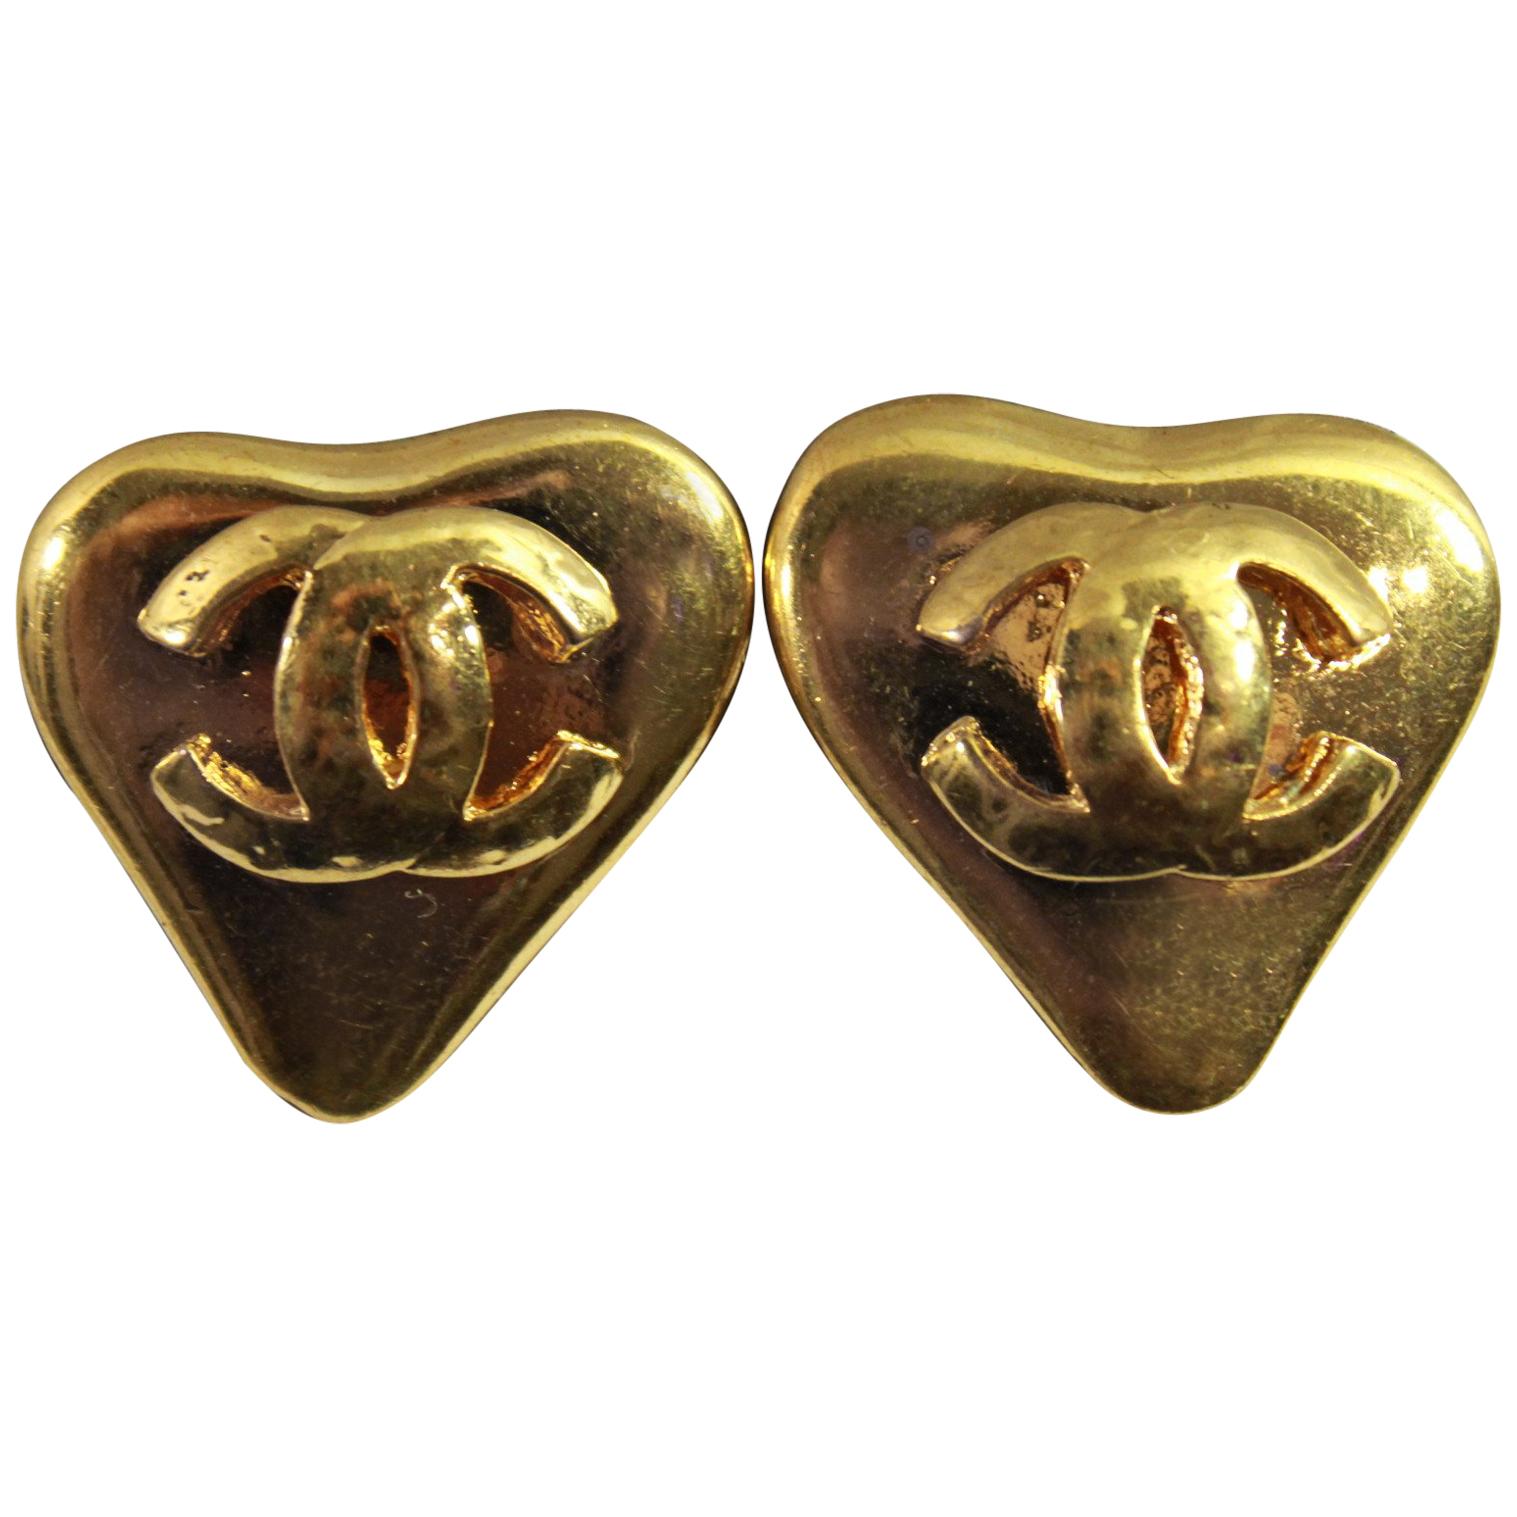 90's Chanel Vintage  Heart Earrings in Gold-Plated Metal